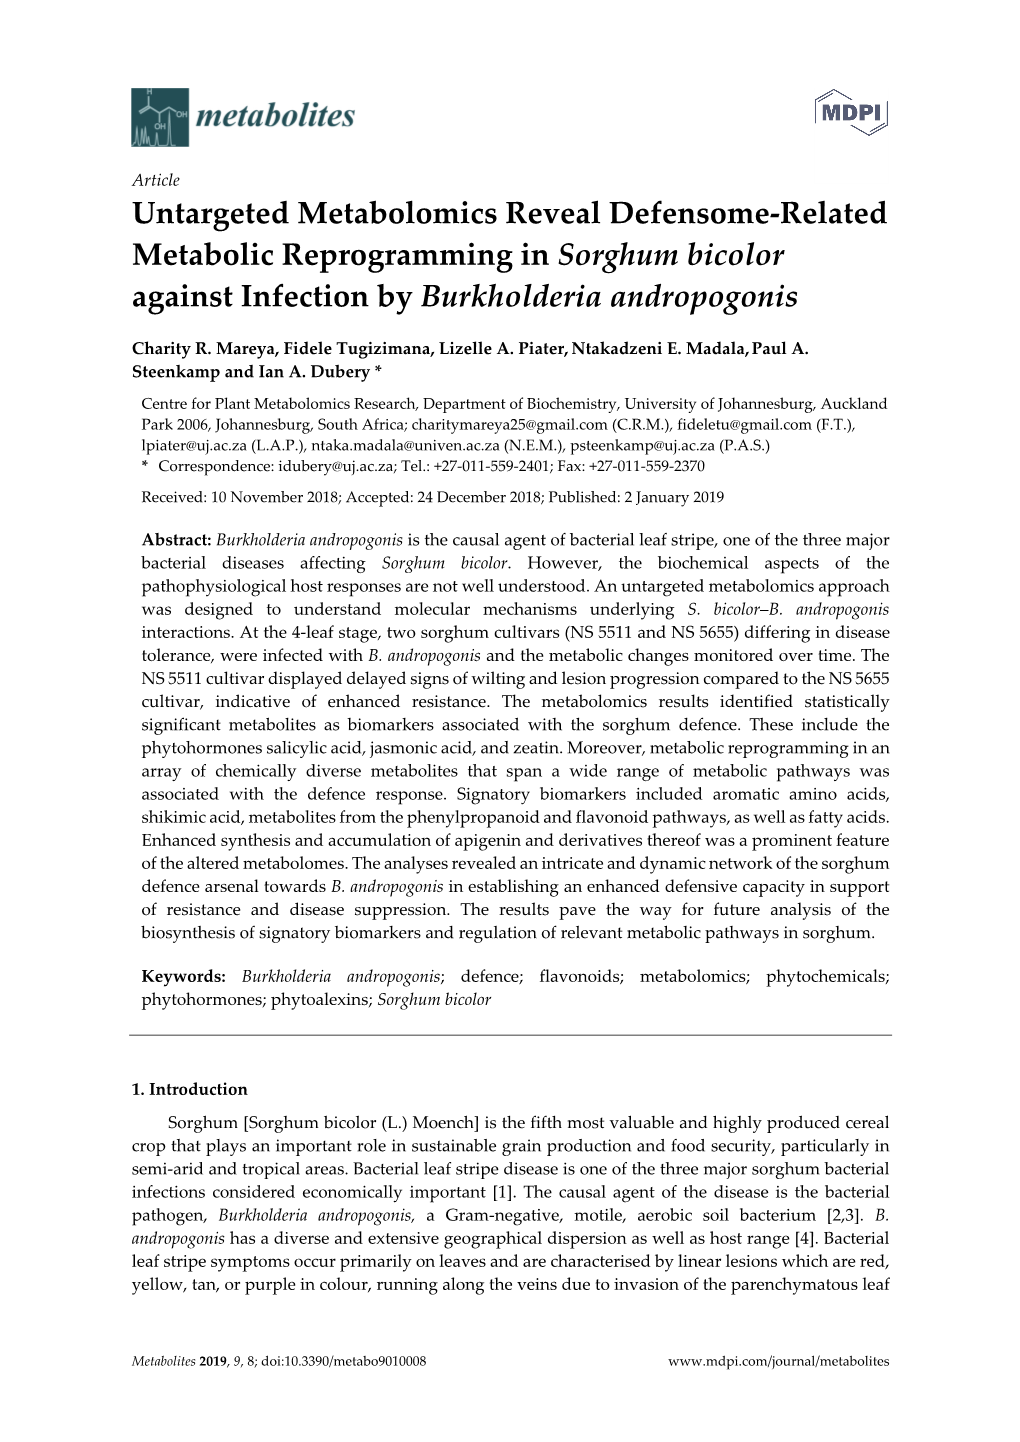 Untargeted Metabolomics Reveal Defensome-Related Metabolic Reprogramming in Sorghum Bicolor Against Infection by Burkholderia Andropogonis